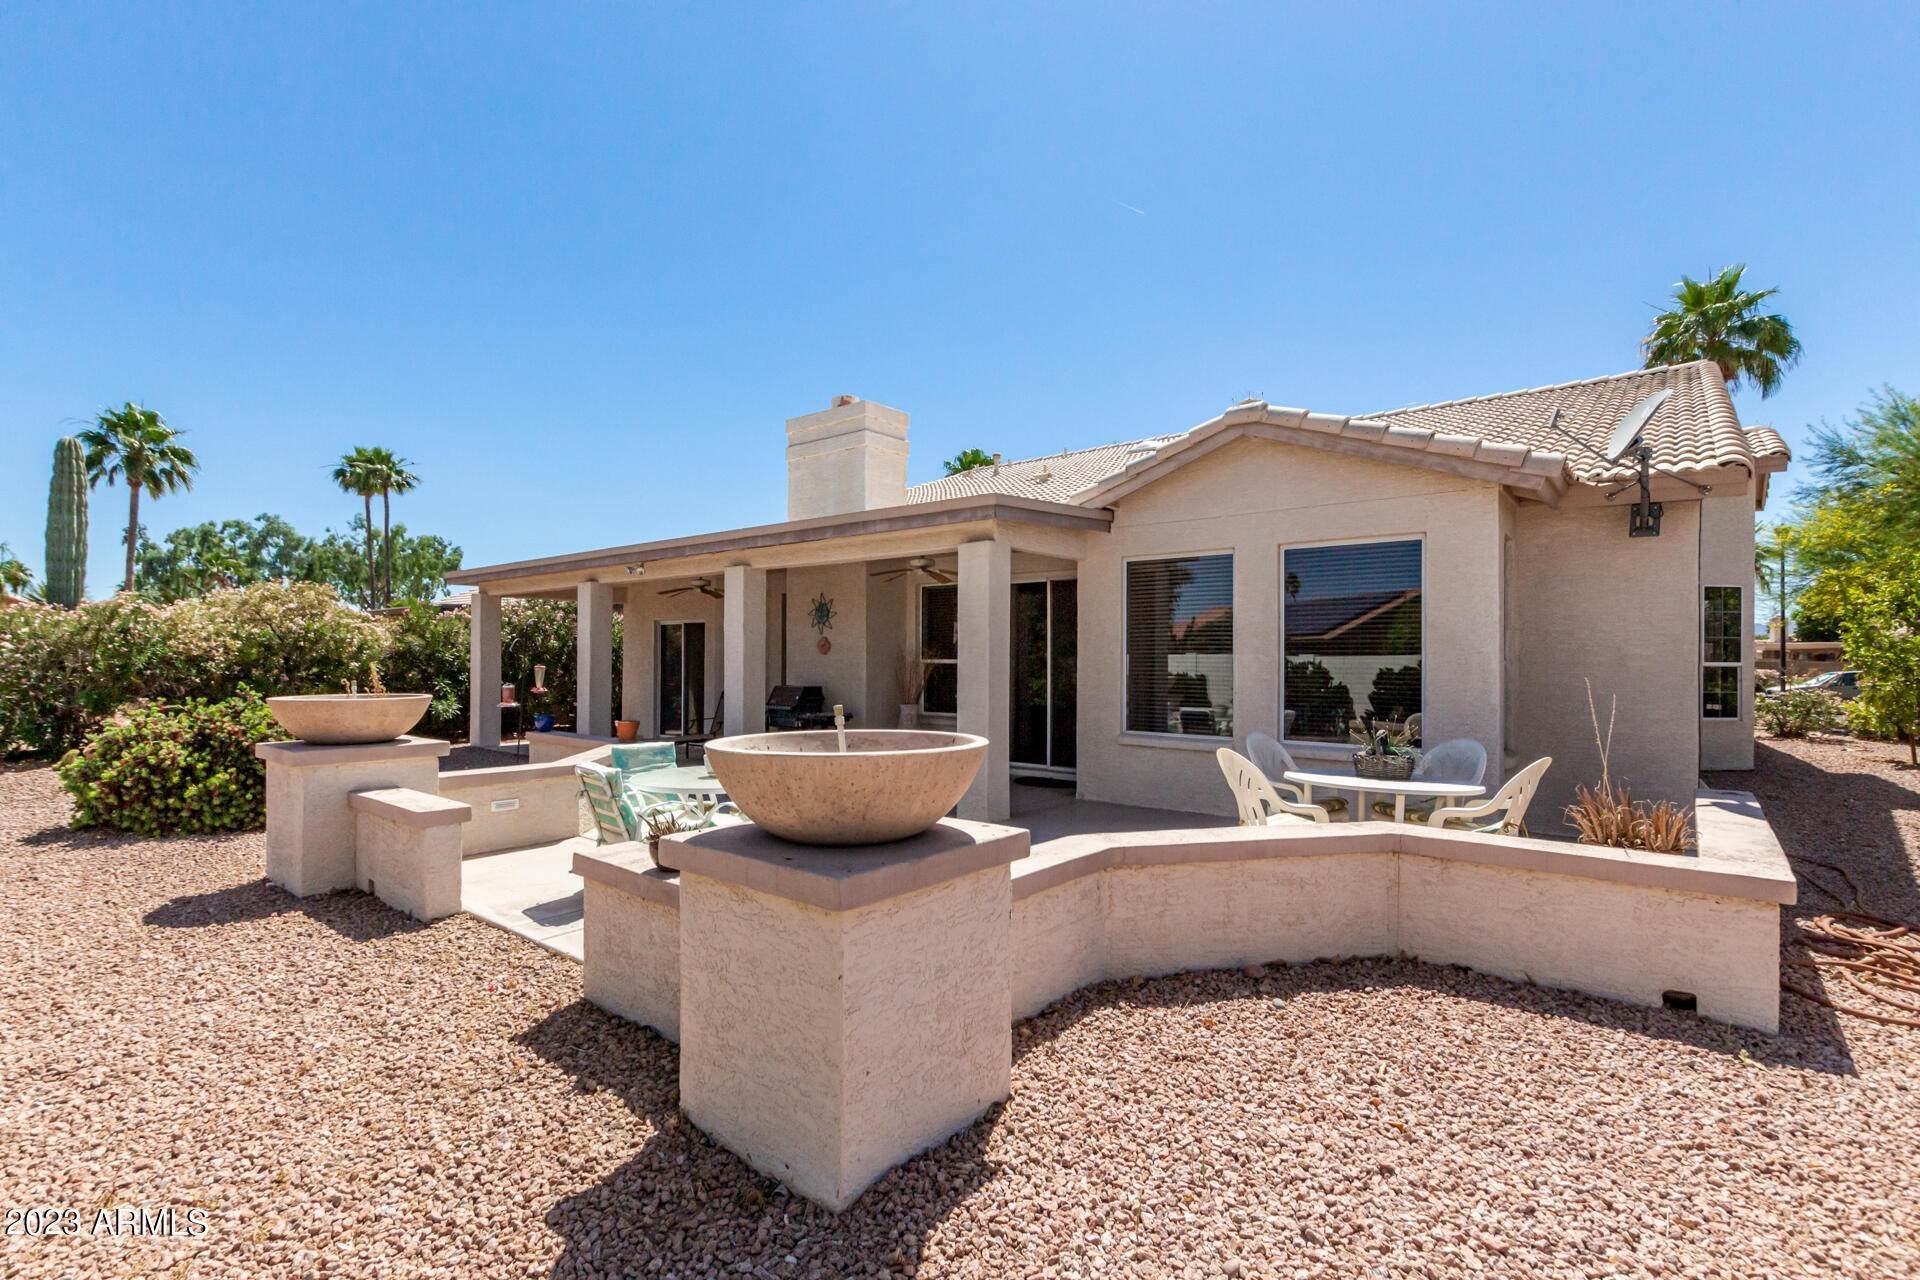 32. Single Family for Sale at Goodyear, AZ 85395